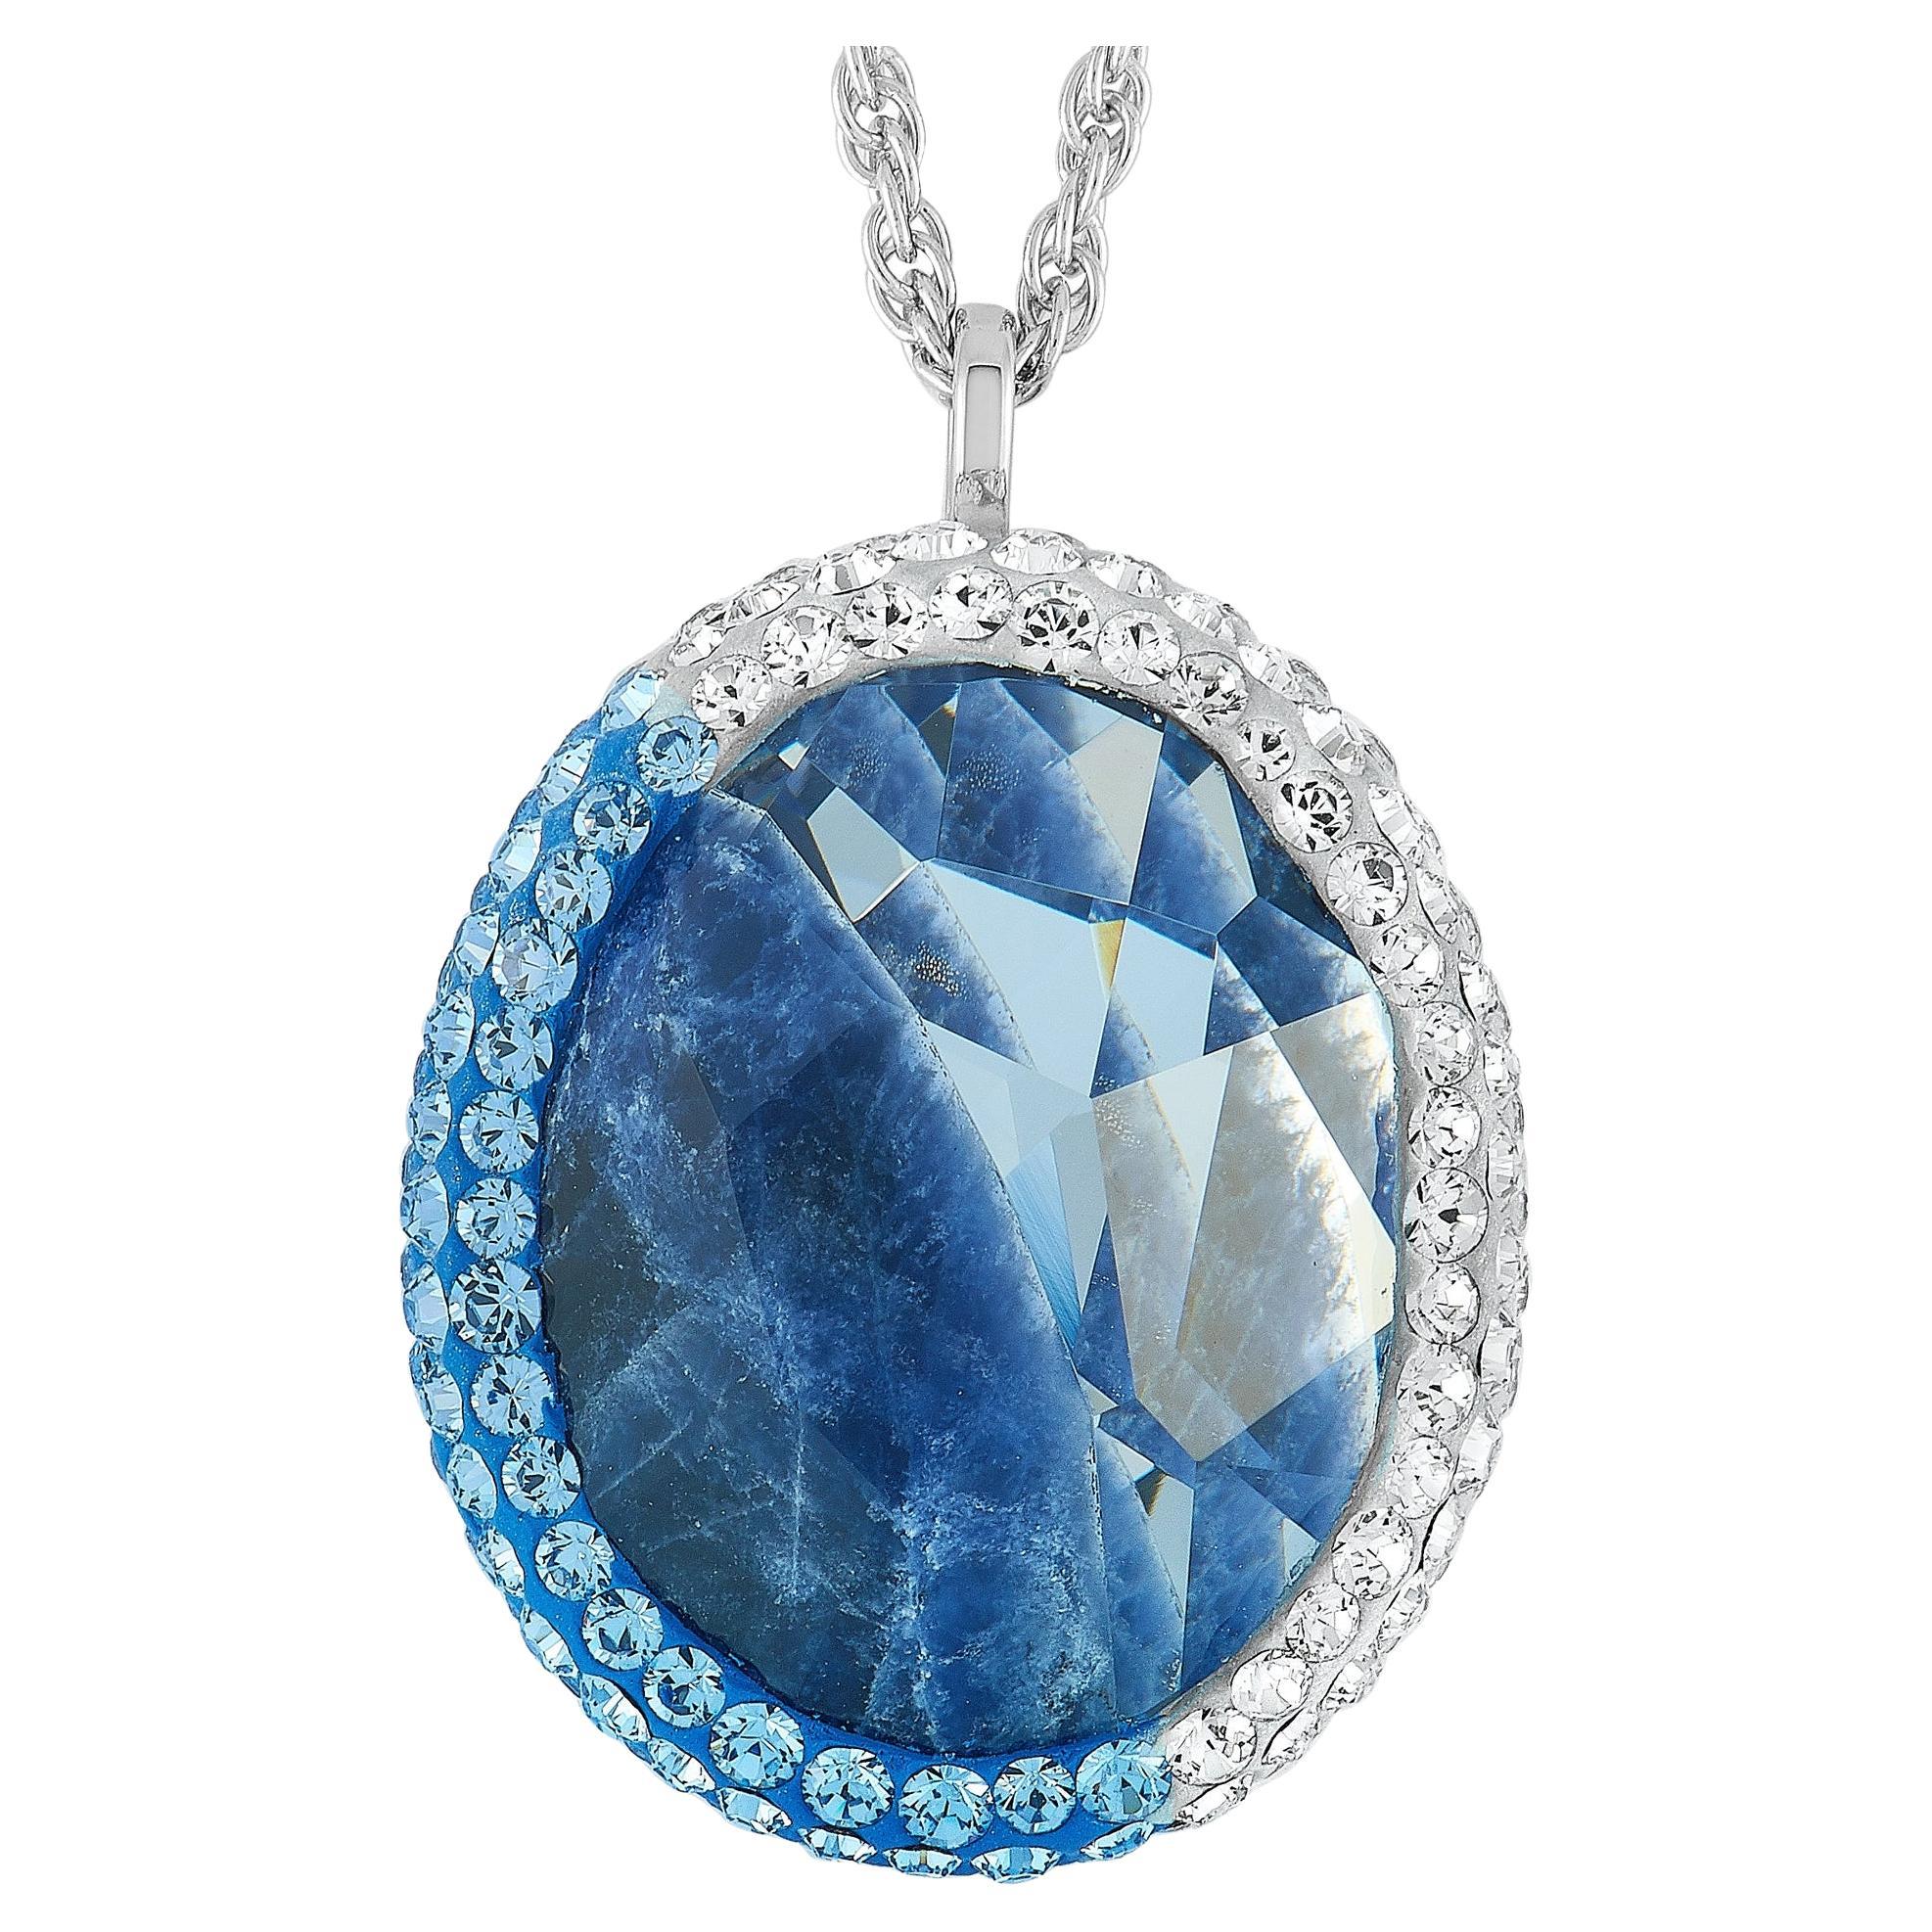 Swarovski Rhodium-Plated Stainless Steel Blue & Clear Crystals Pendant Necklace For Sale